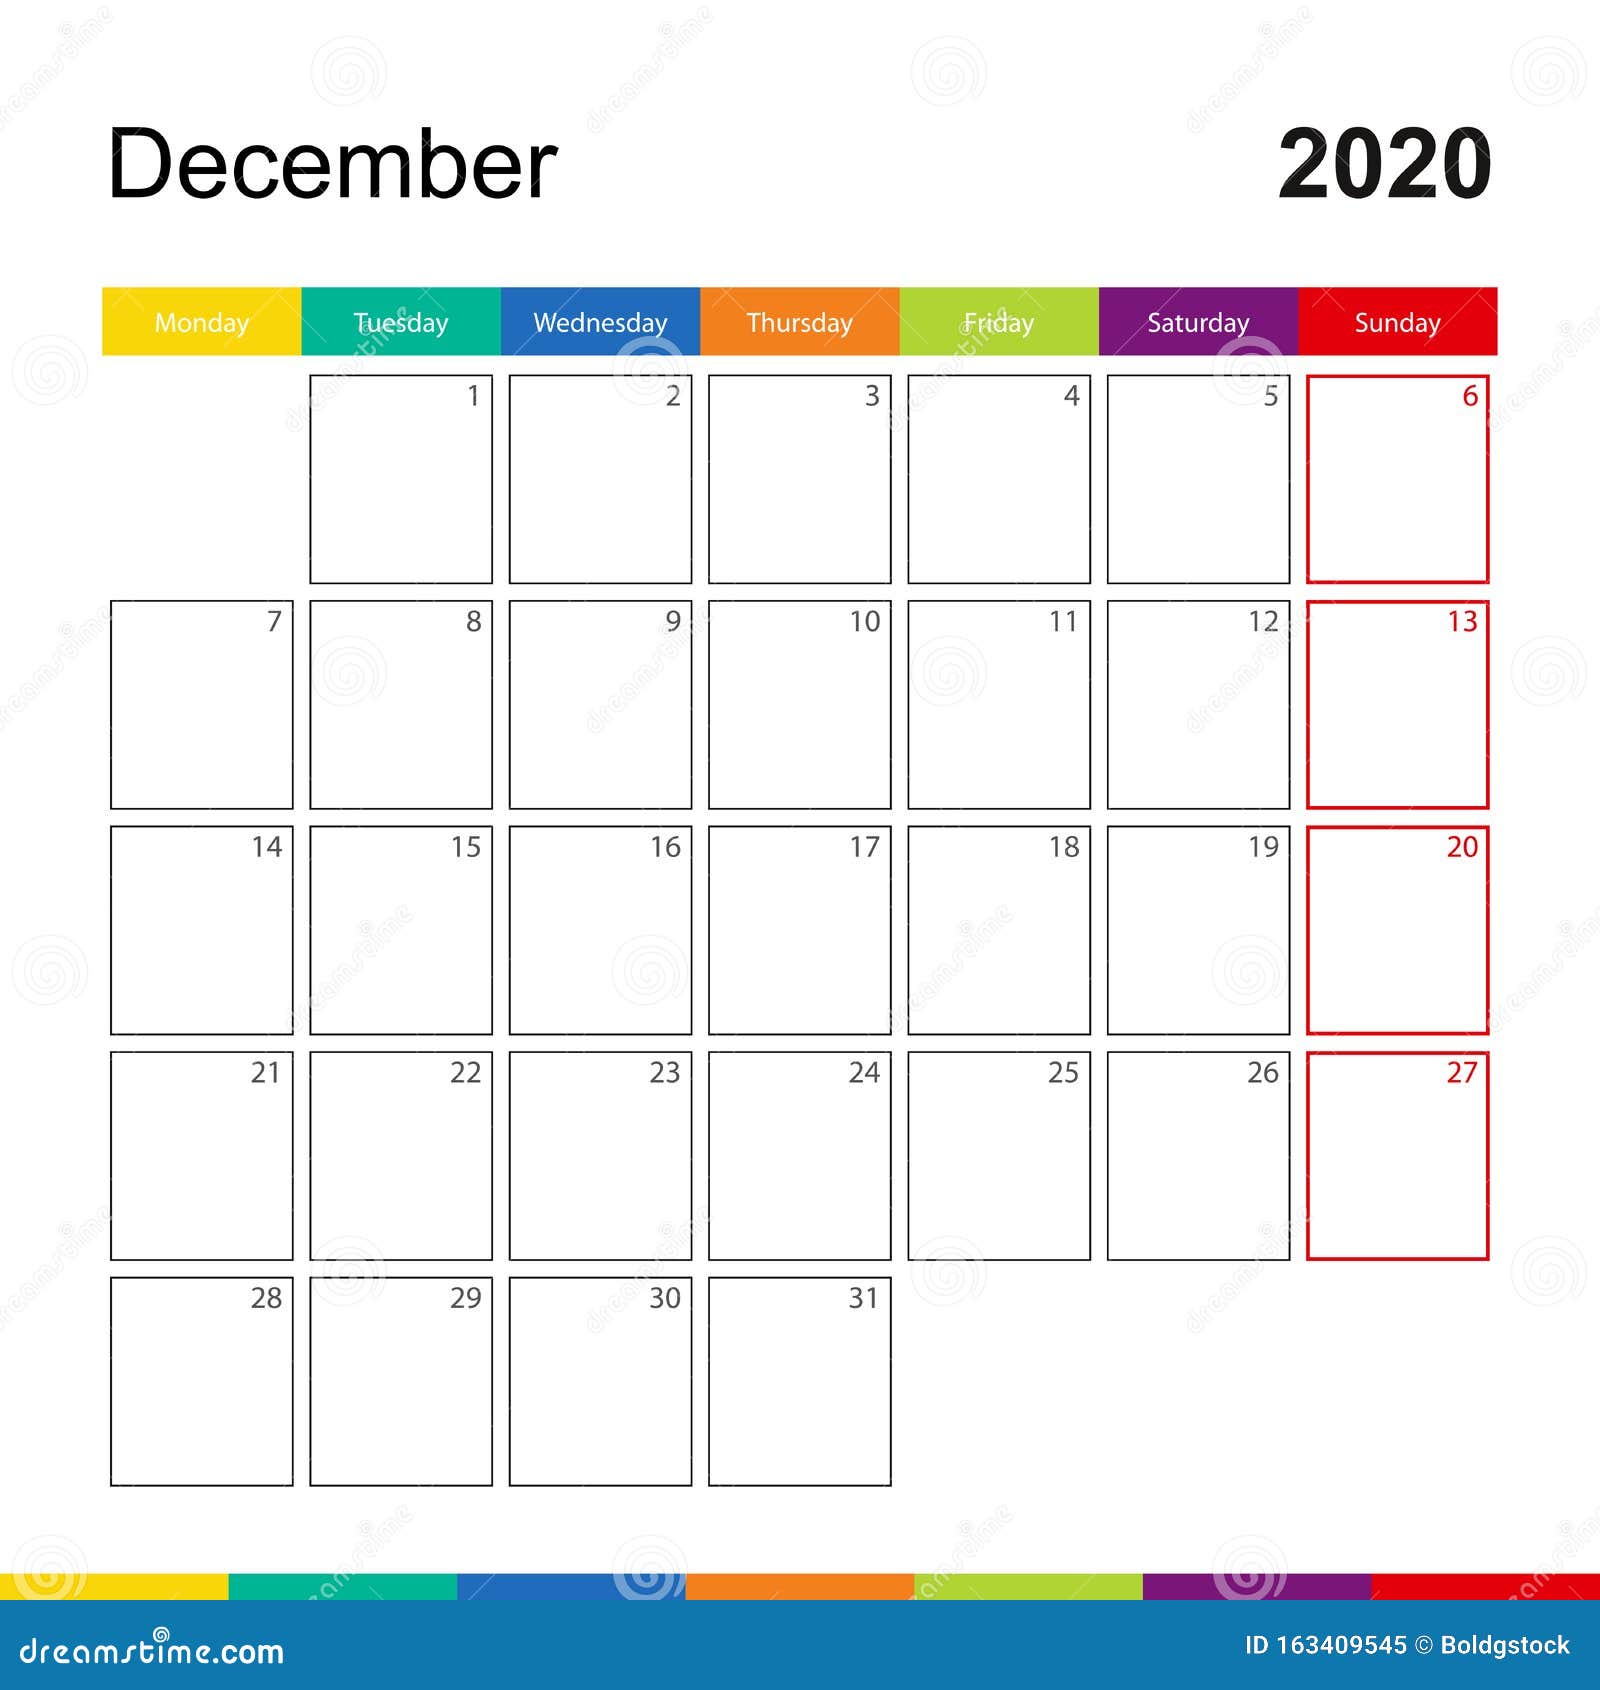 December 2020 Colorful Wall Calendar, Week Starts On Monday Stock Vector Illustration of wall